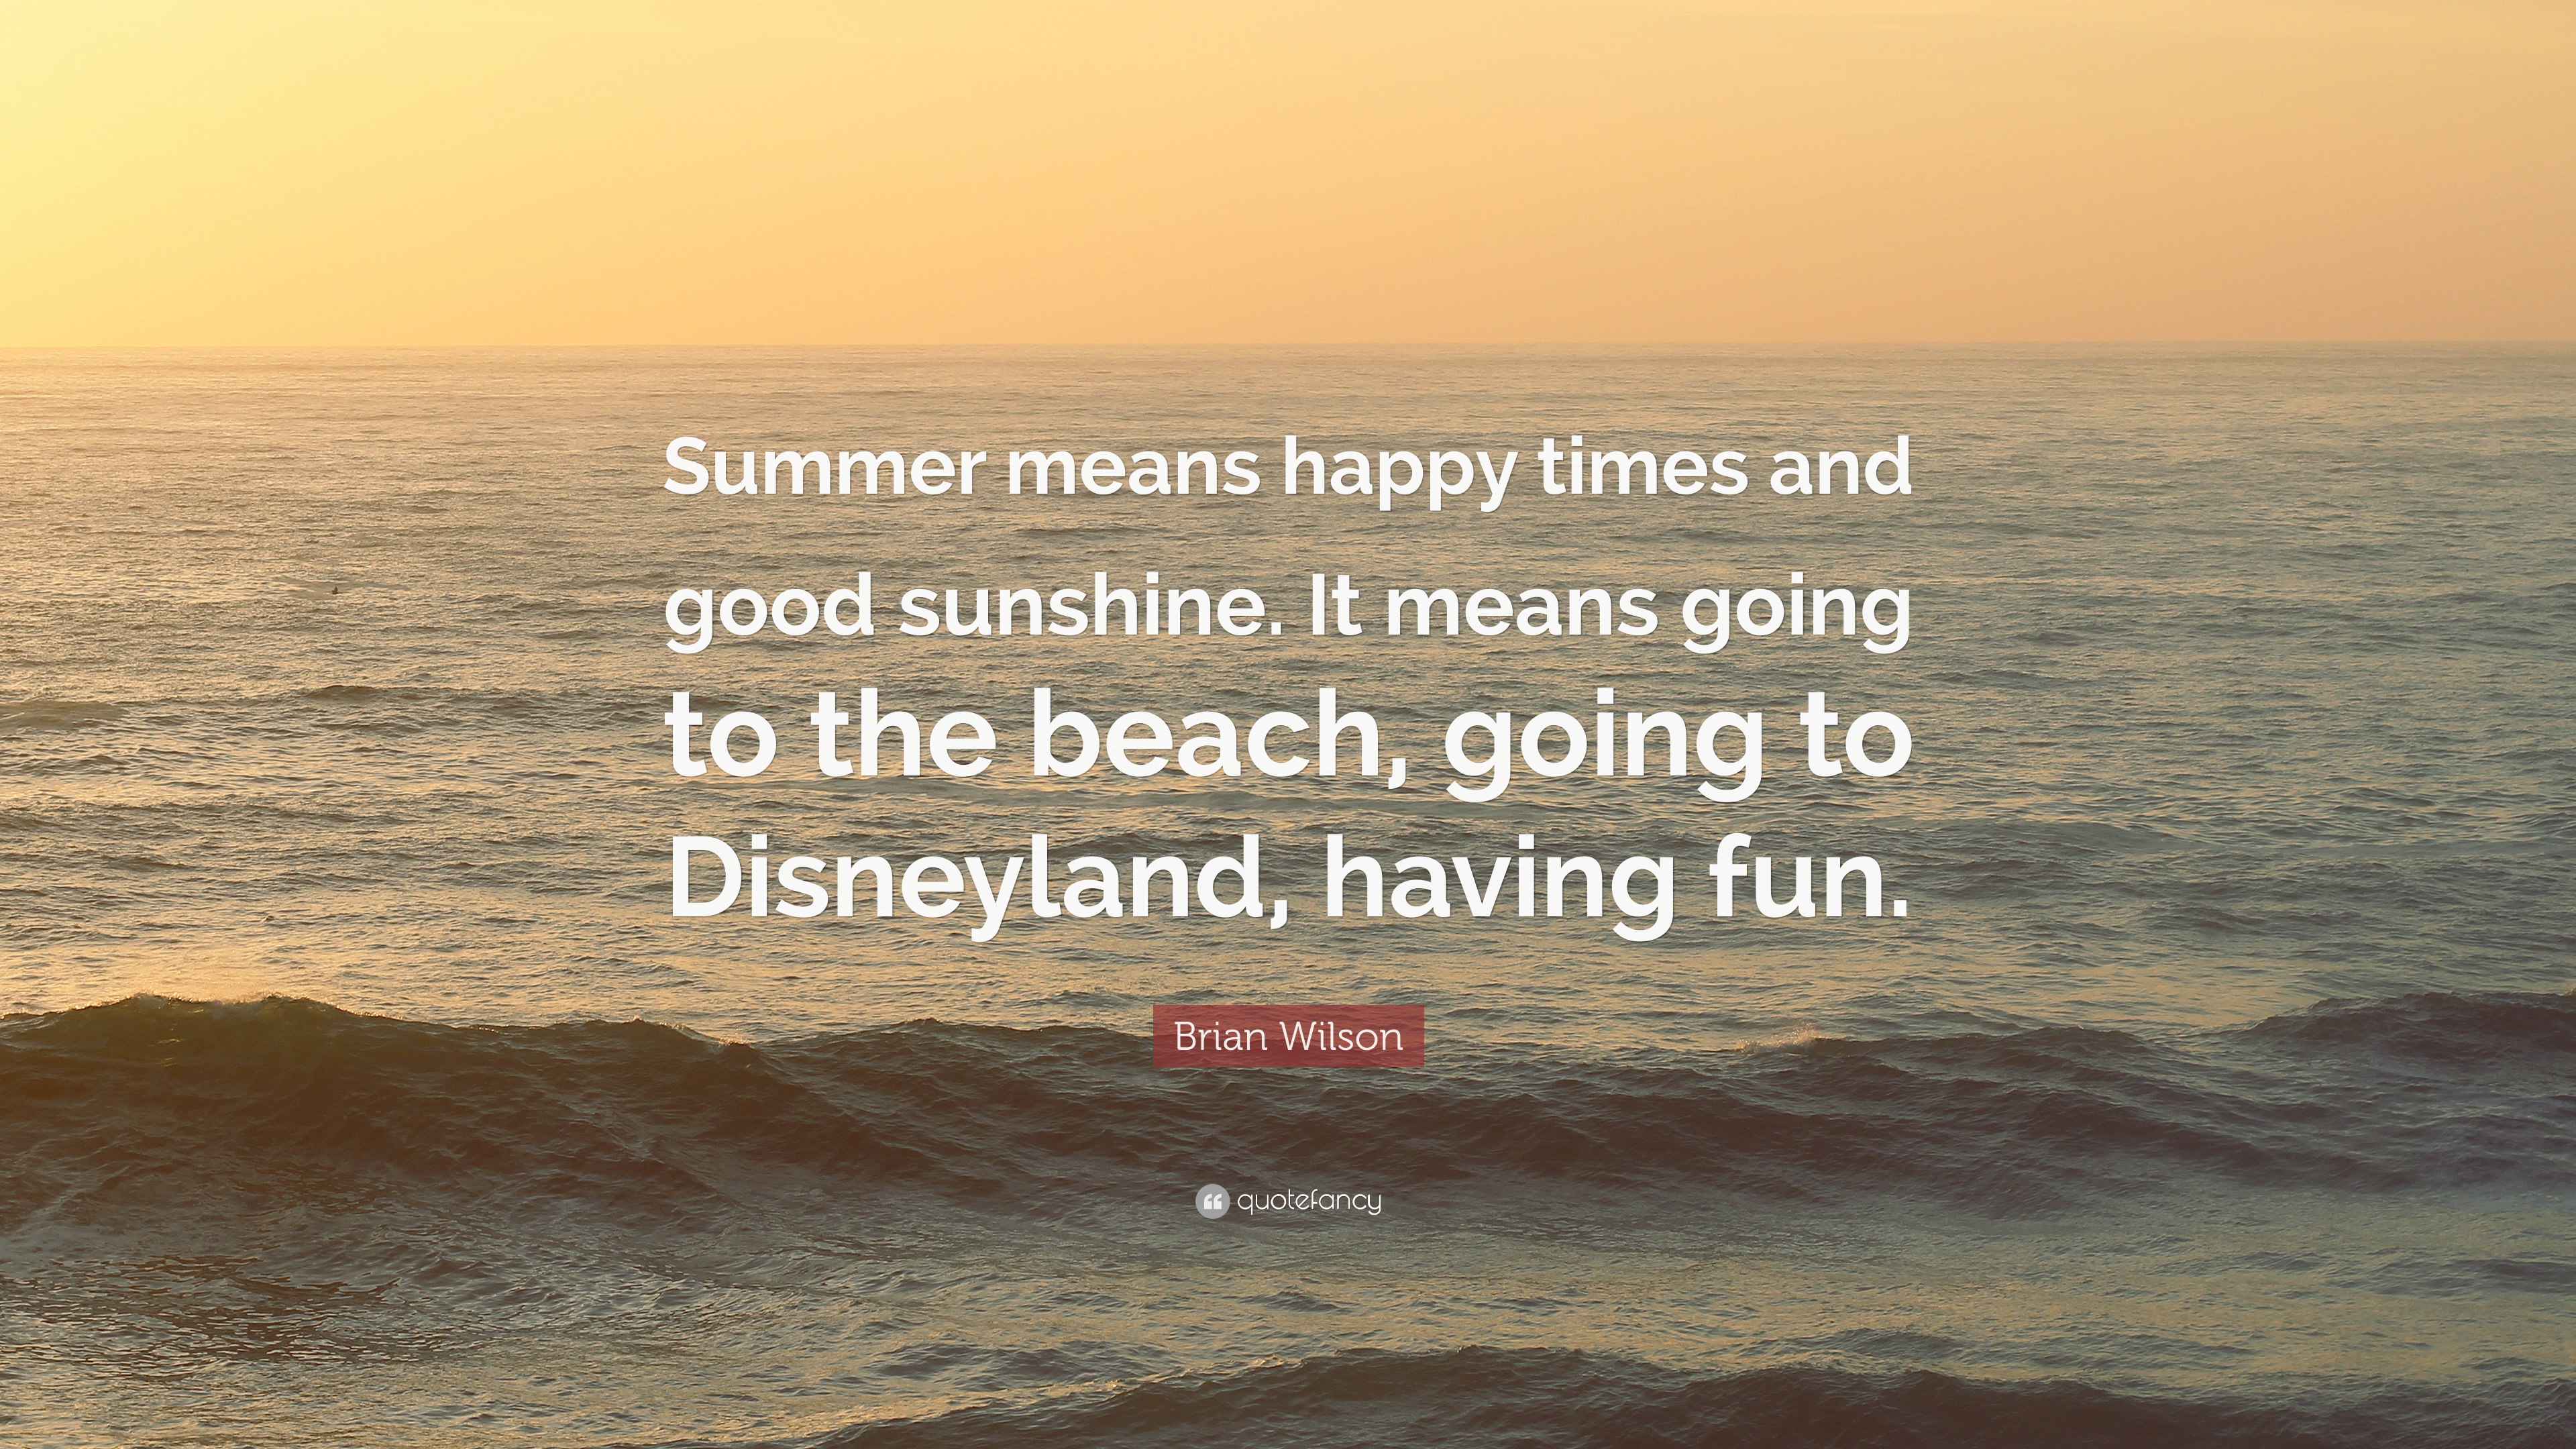 Brian Wilson Quote: “Summer means happy times and good sunshine. It means going to the beach